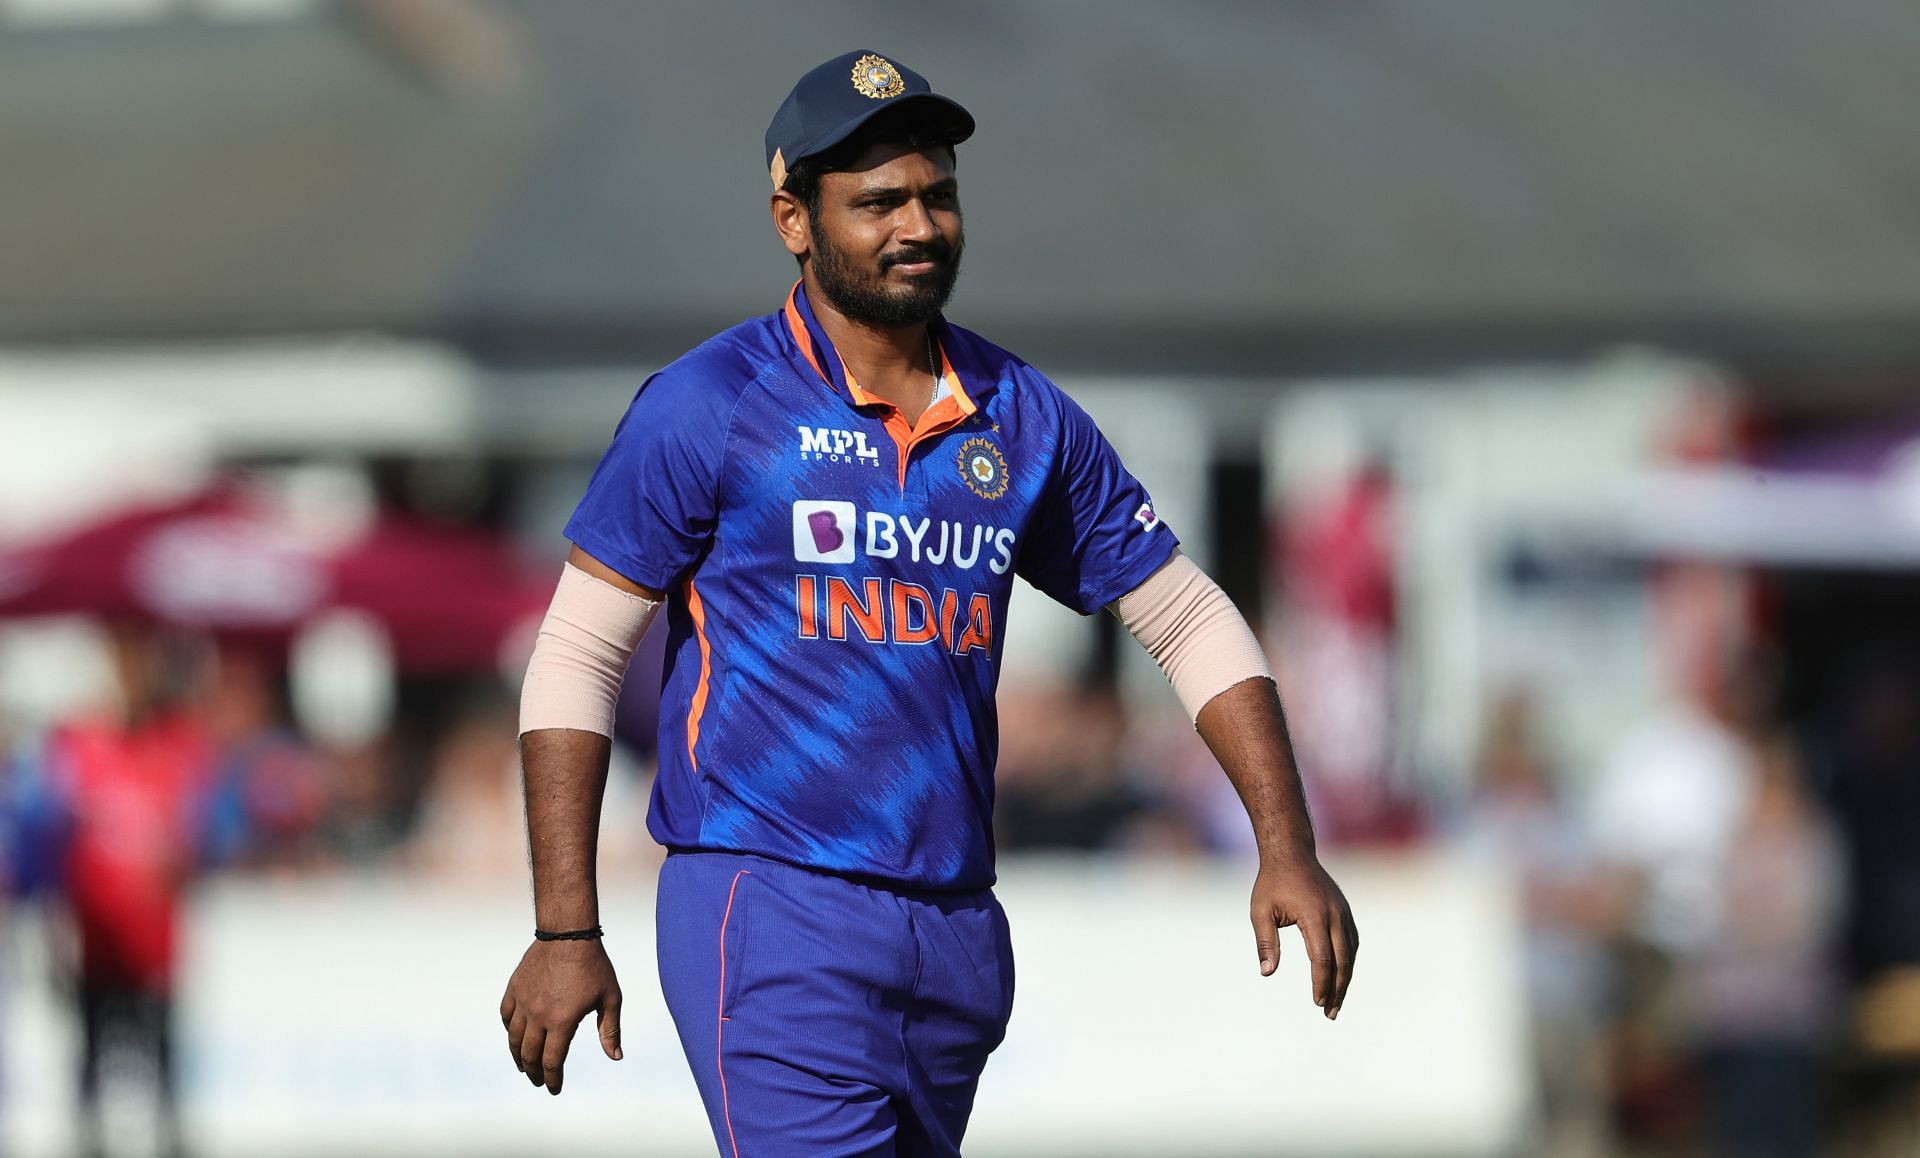 Samson has played 16 T20Is for India